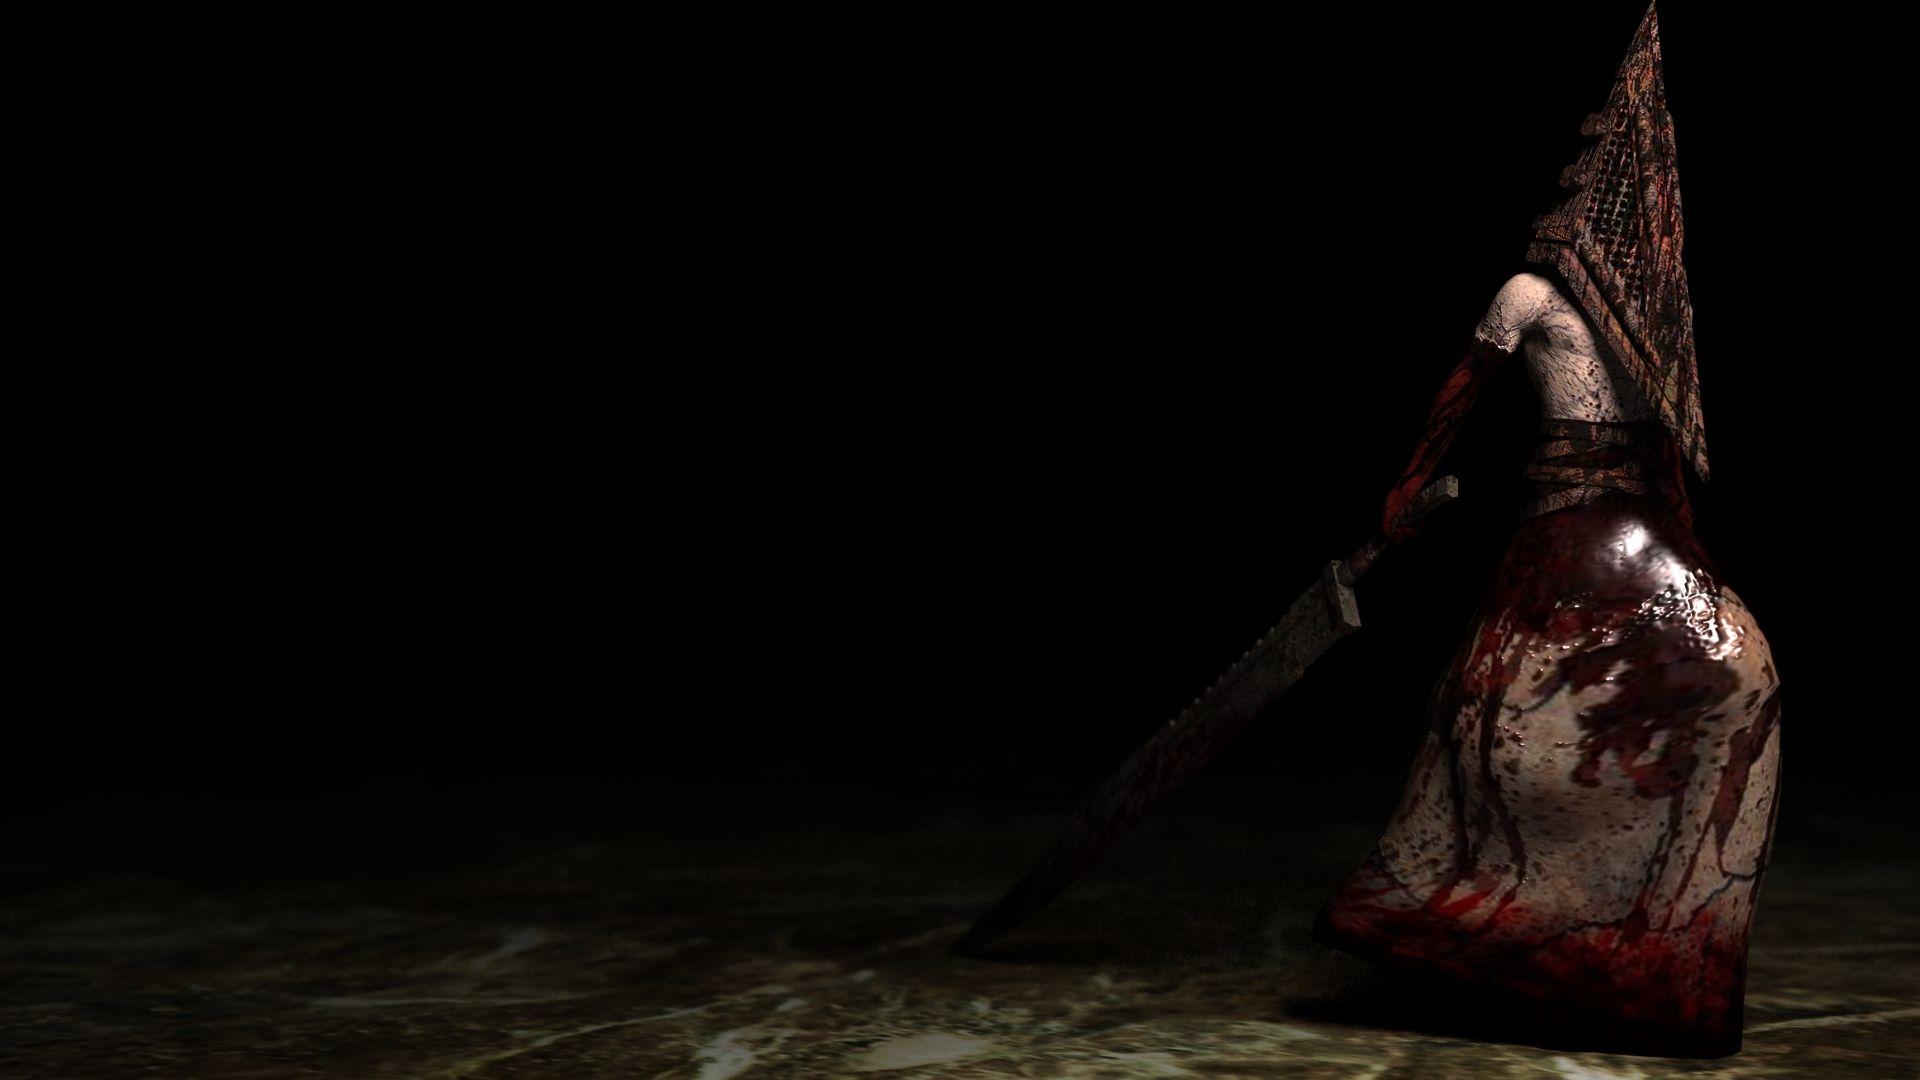 High Quality Pyramid Head Wallpaper. Full HD Picture